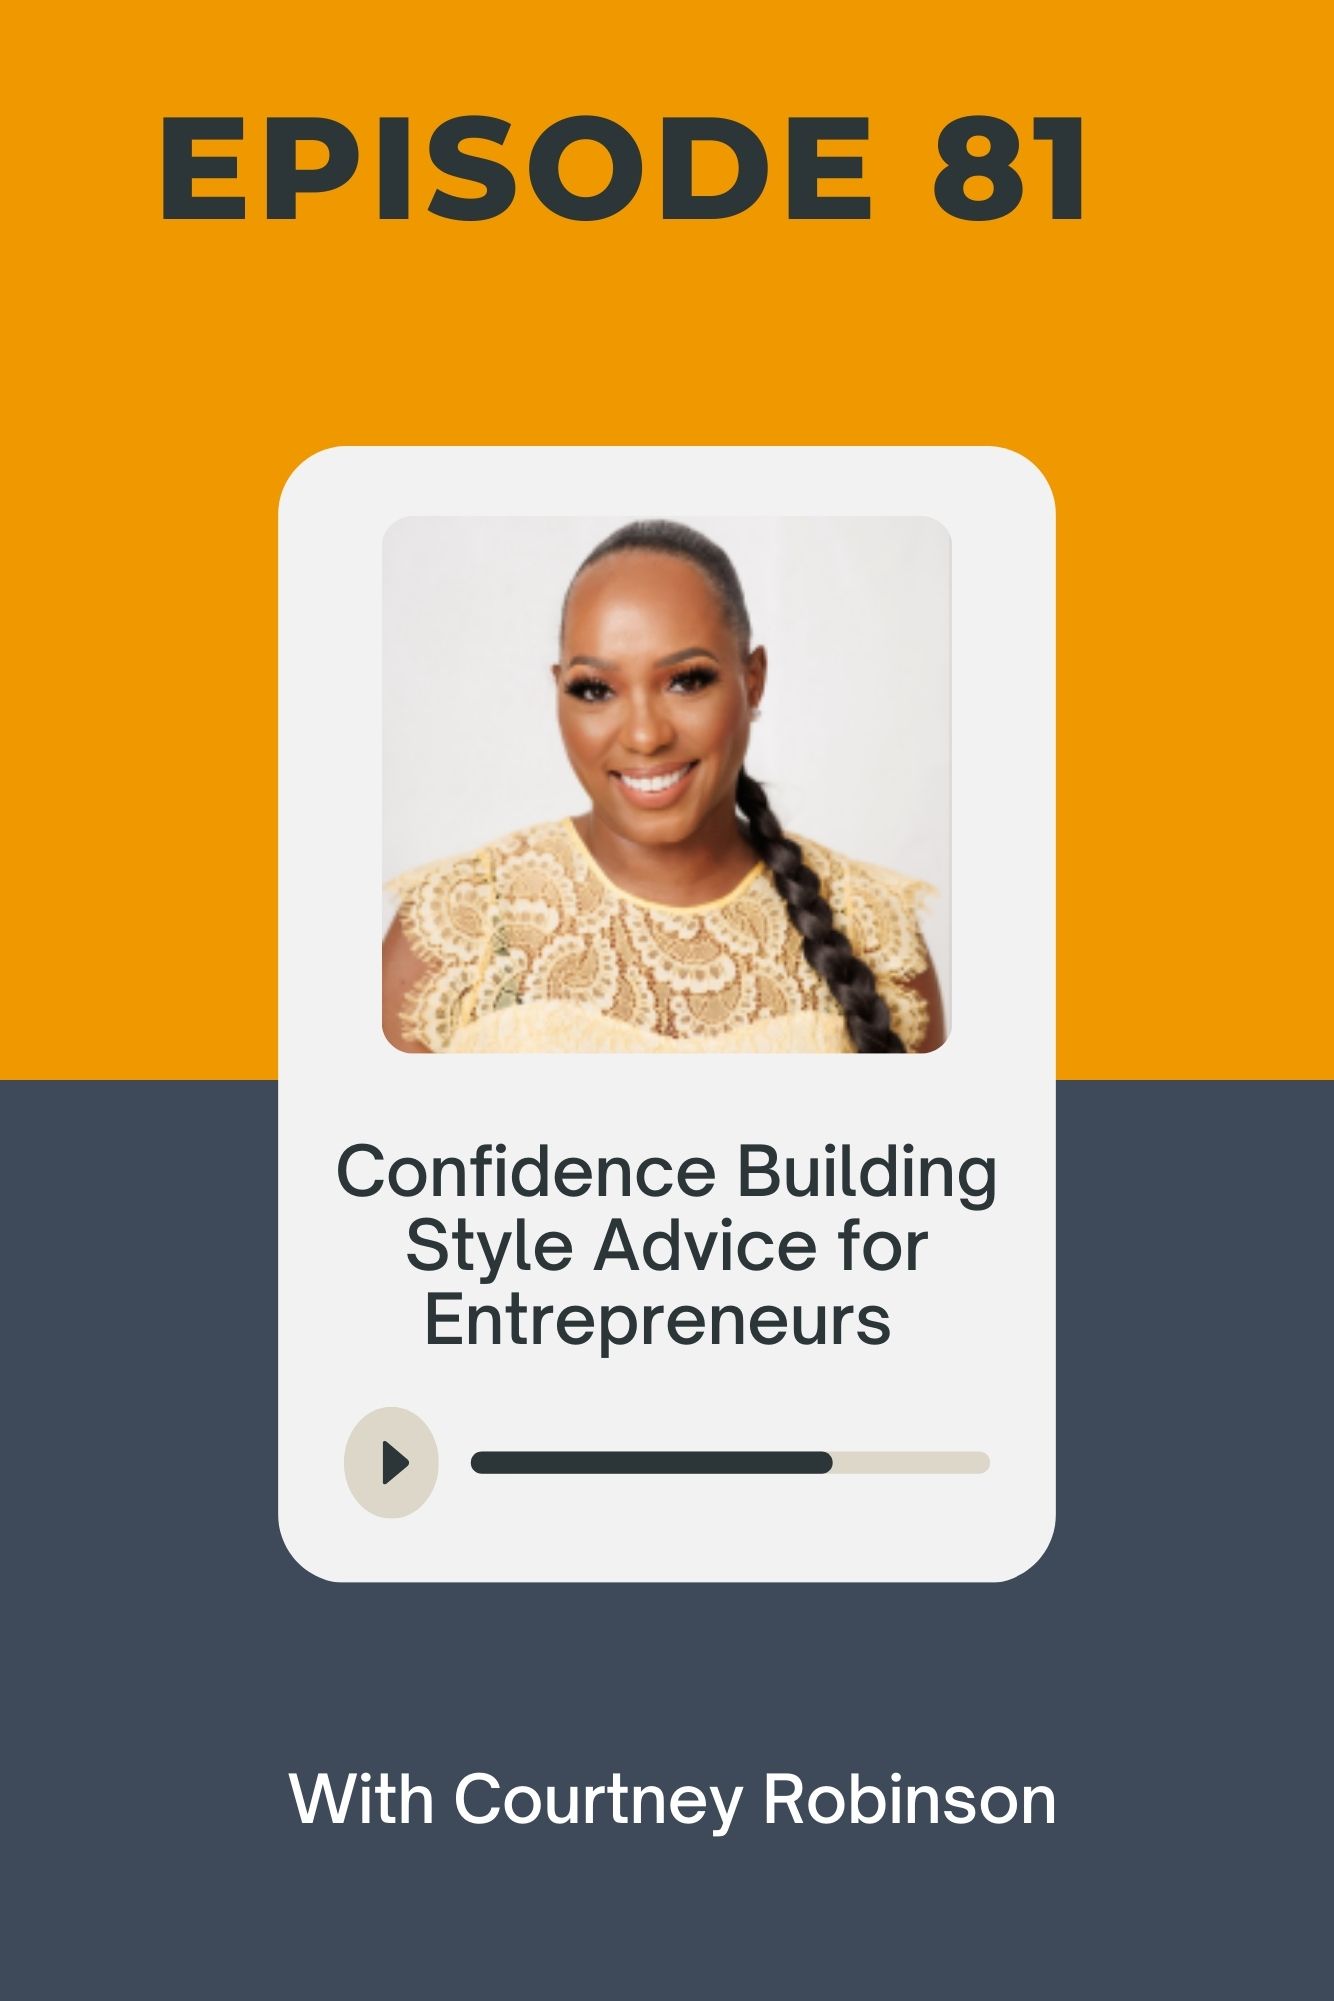 A Christian business podcast for women about style advice and confidence with Courtney Robinson.